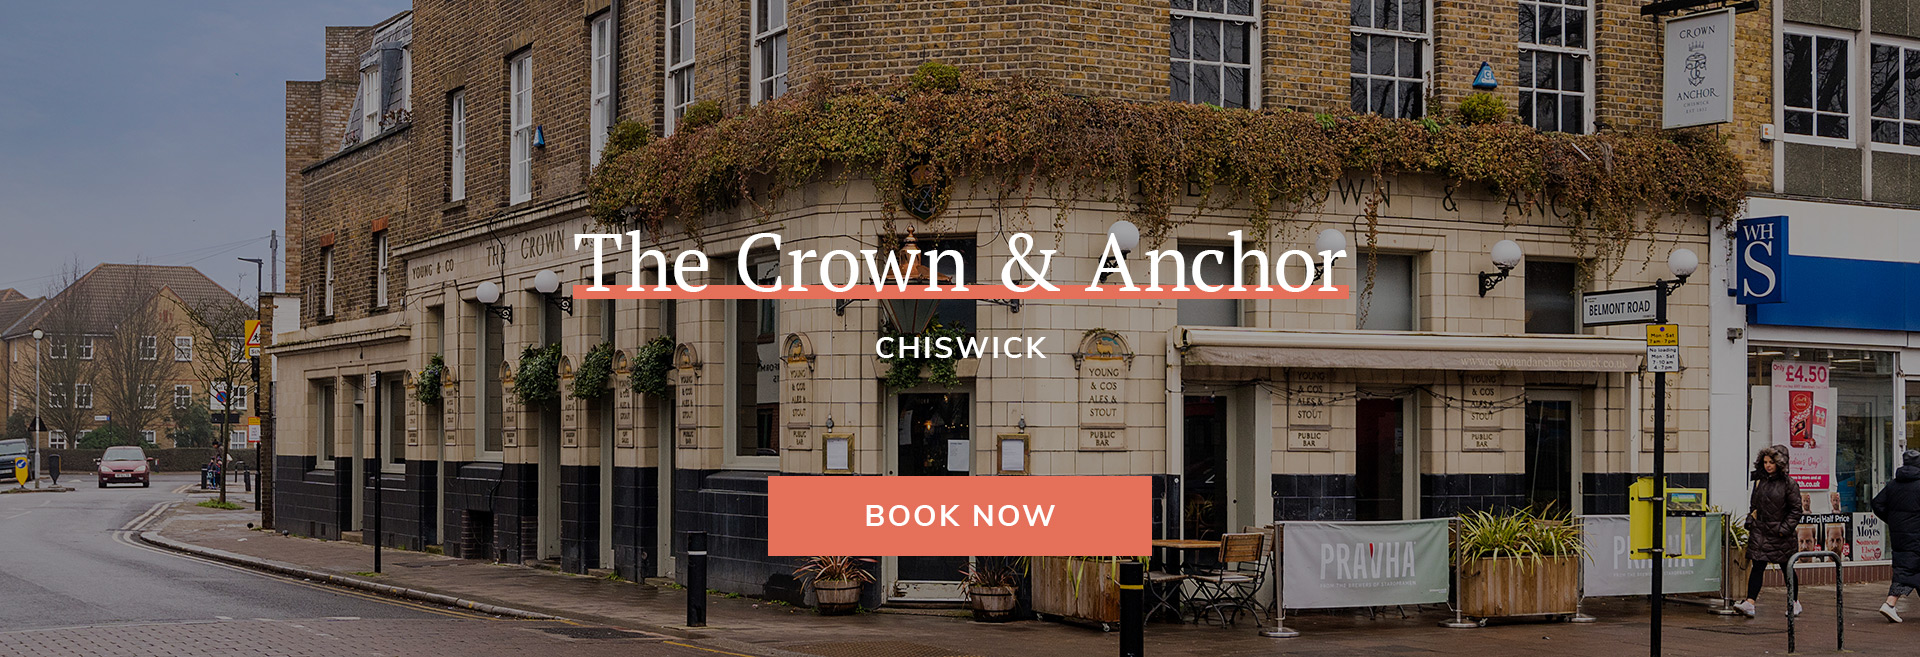 The Crown and Anchor Chiswick Banner 1